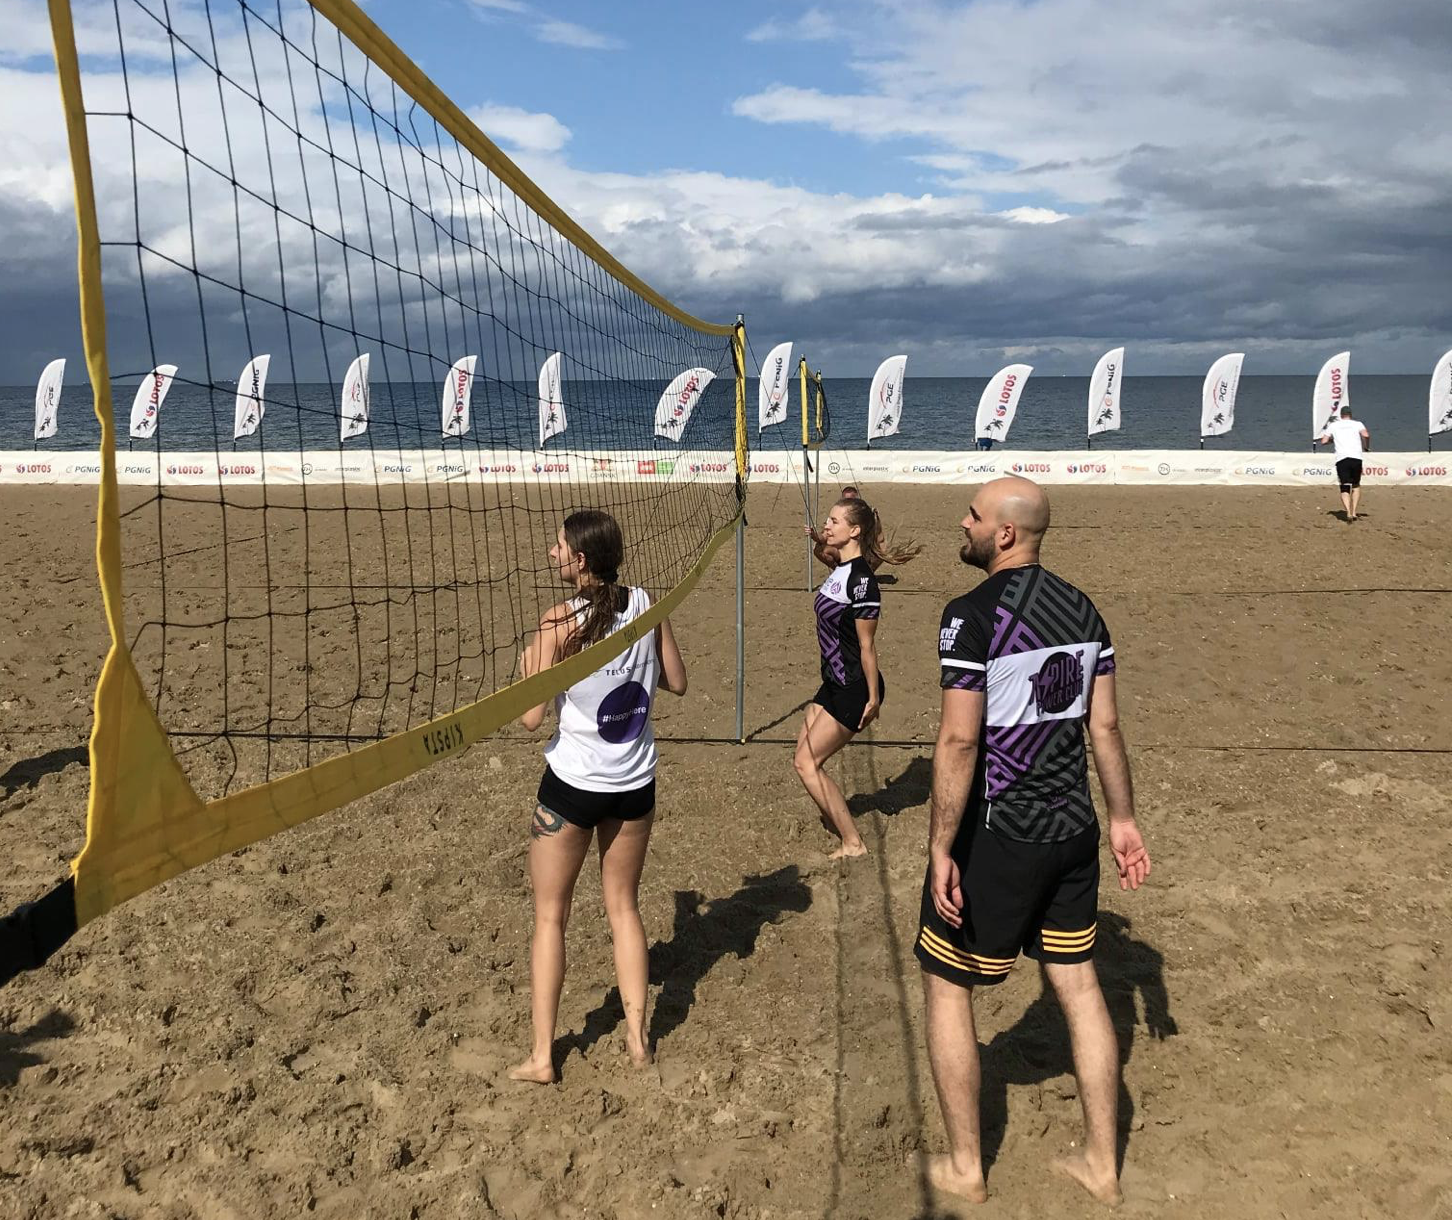 Budapest BSC Charity Beach Volleyball Tourney Coming in June